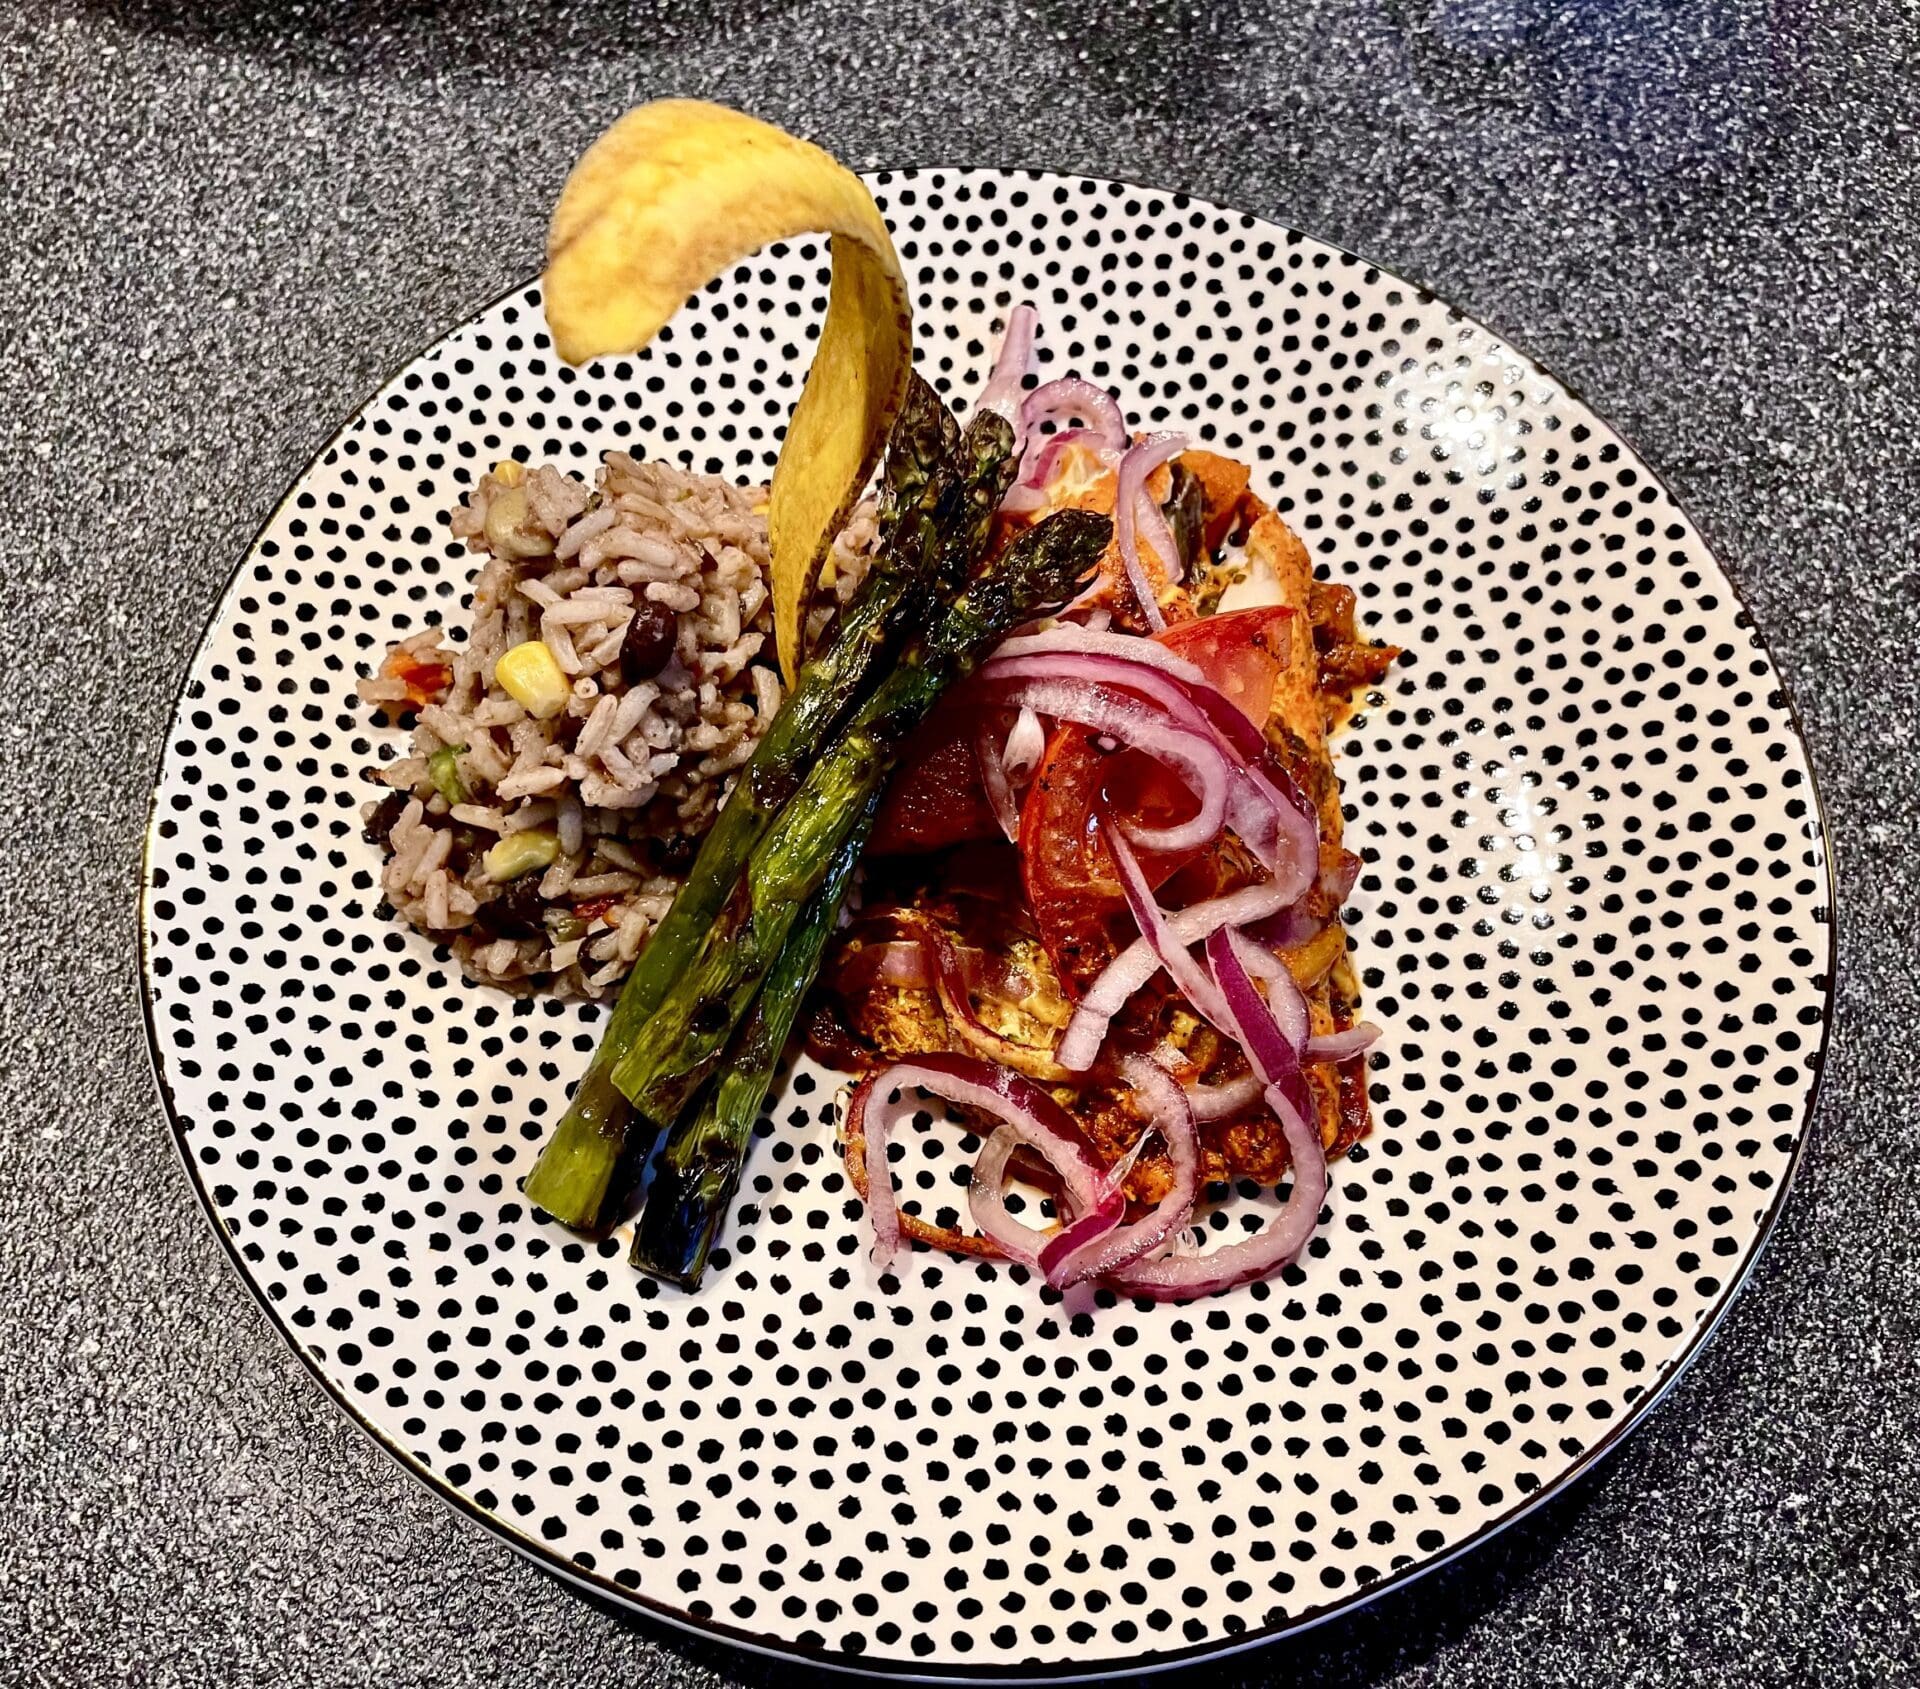 A plate with asparagus and rice on it.